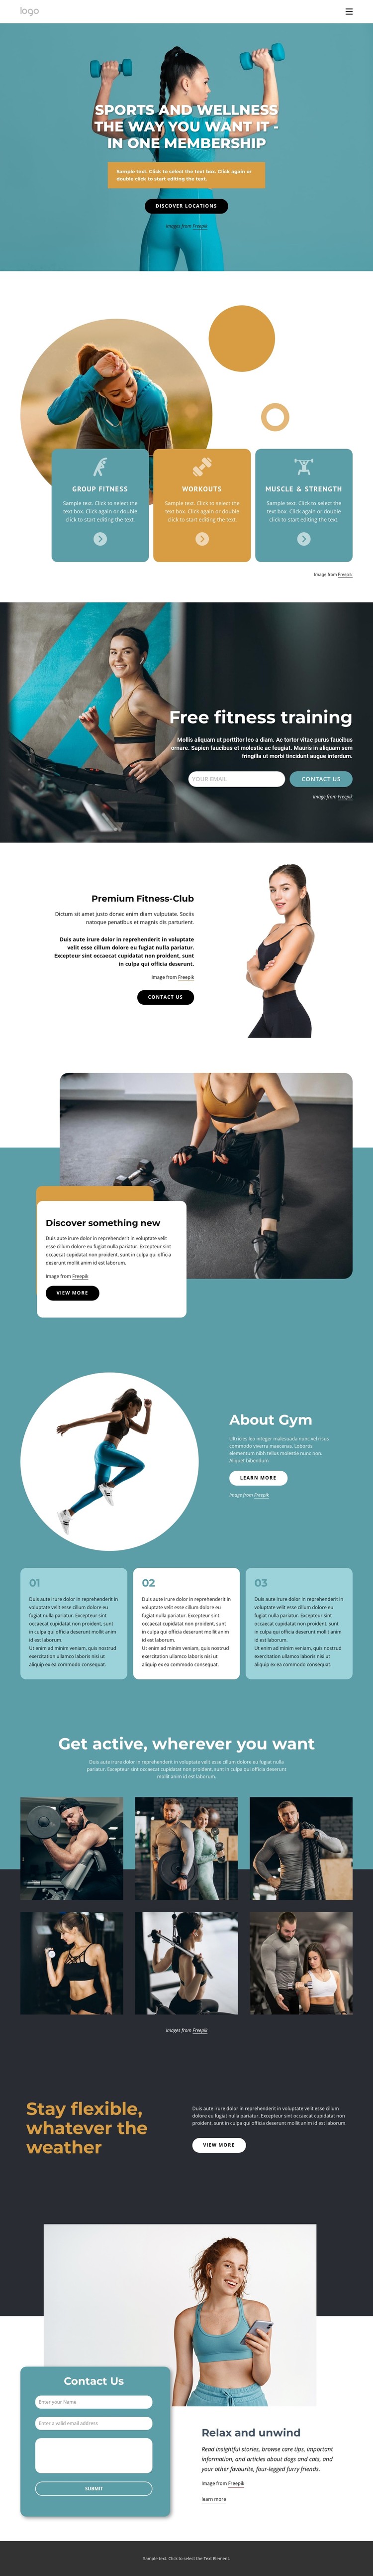 Workout anywhere with one membership CSS Template